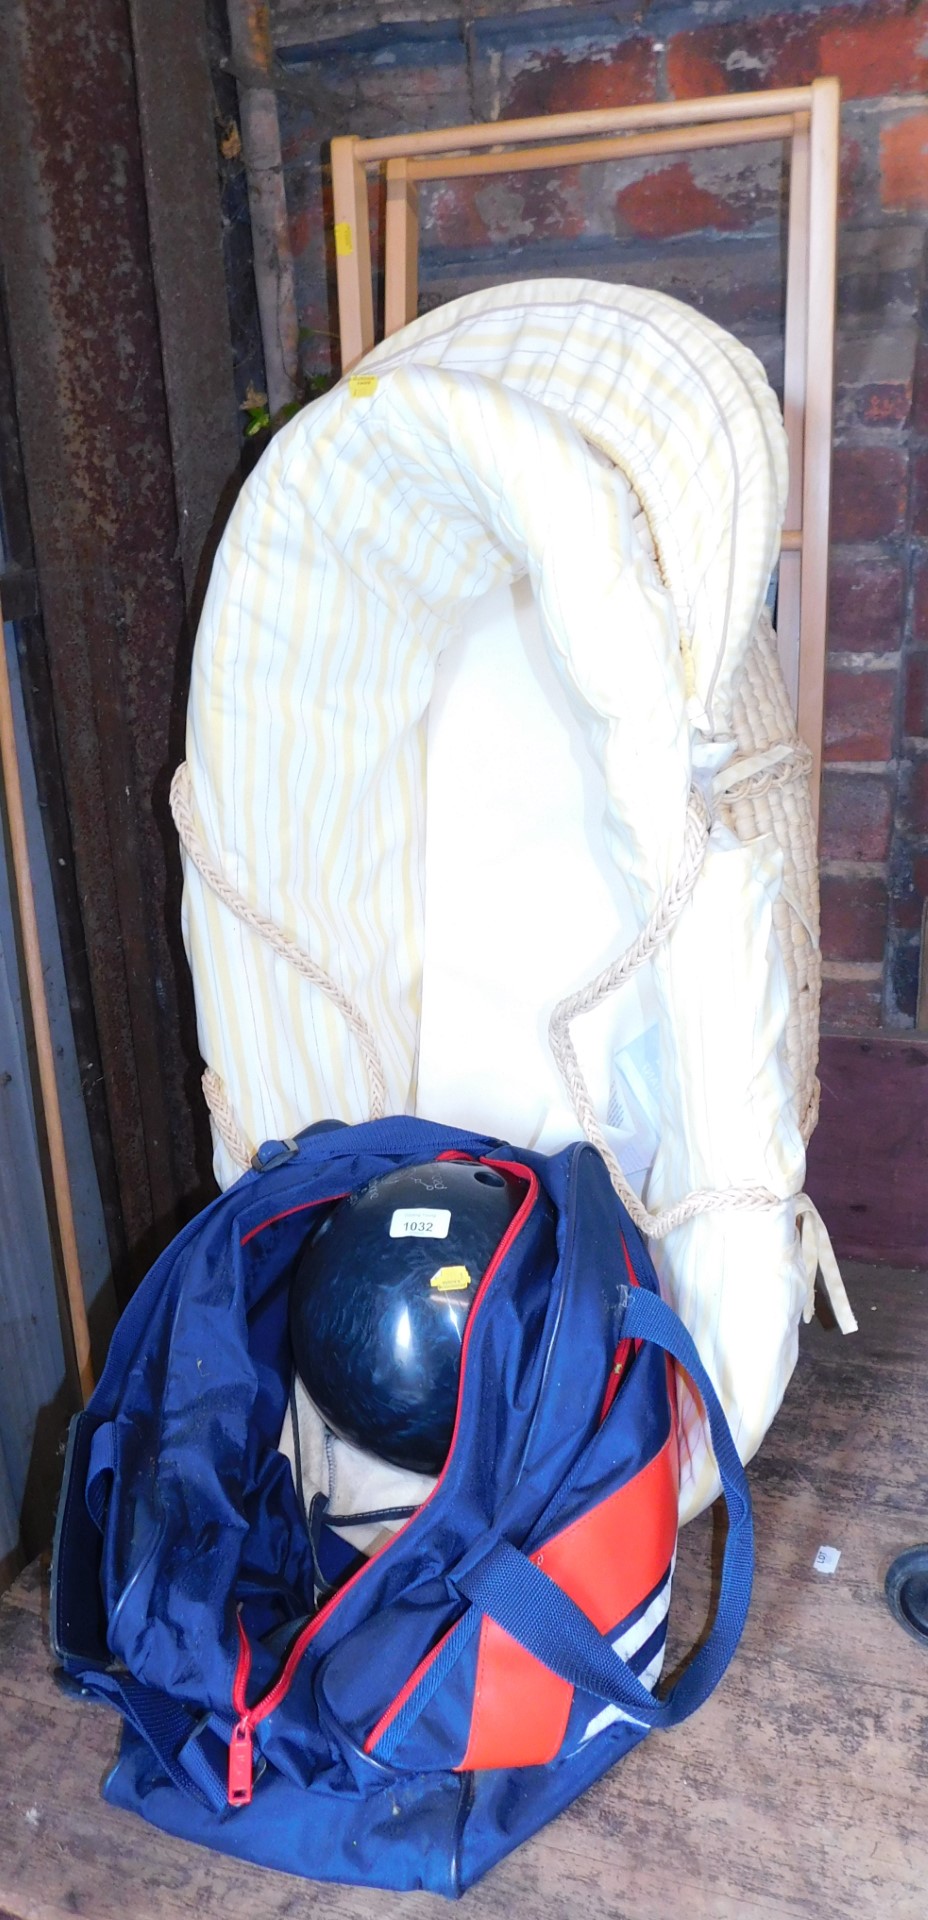 A baby Moses type basket, on an A frame stand, together with a bowling ball in canvas case.